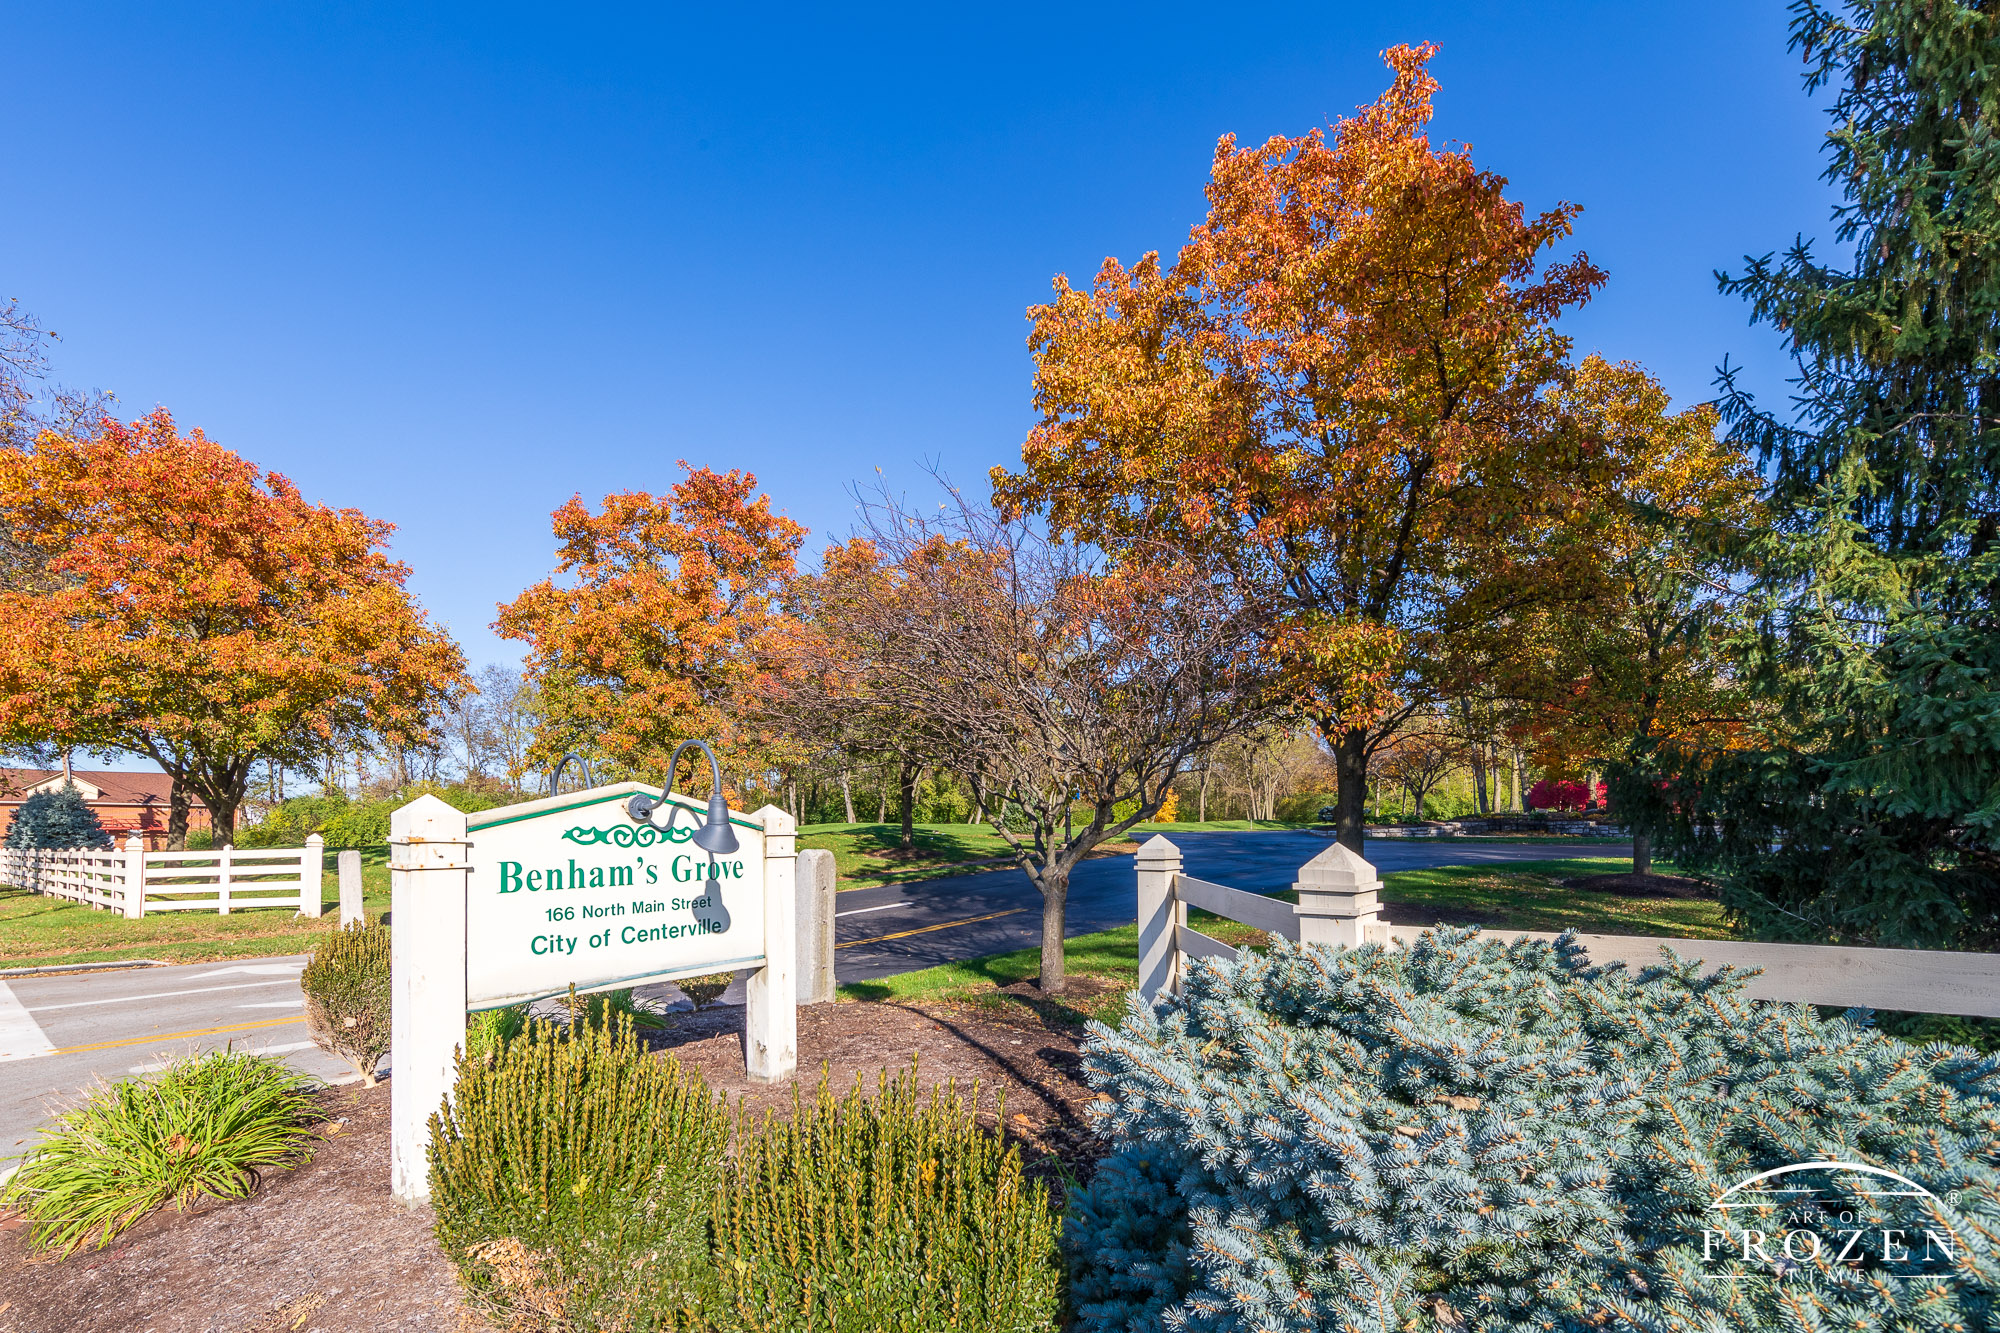 The enterance sign of Benham's Grove as the midday sun illuminates the changing leaves.